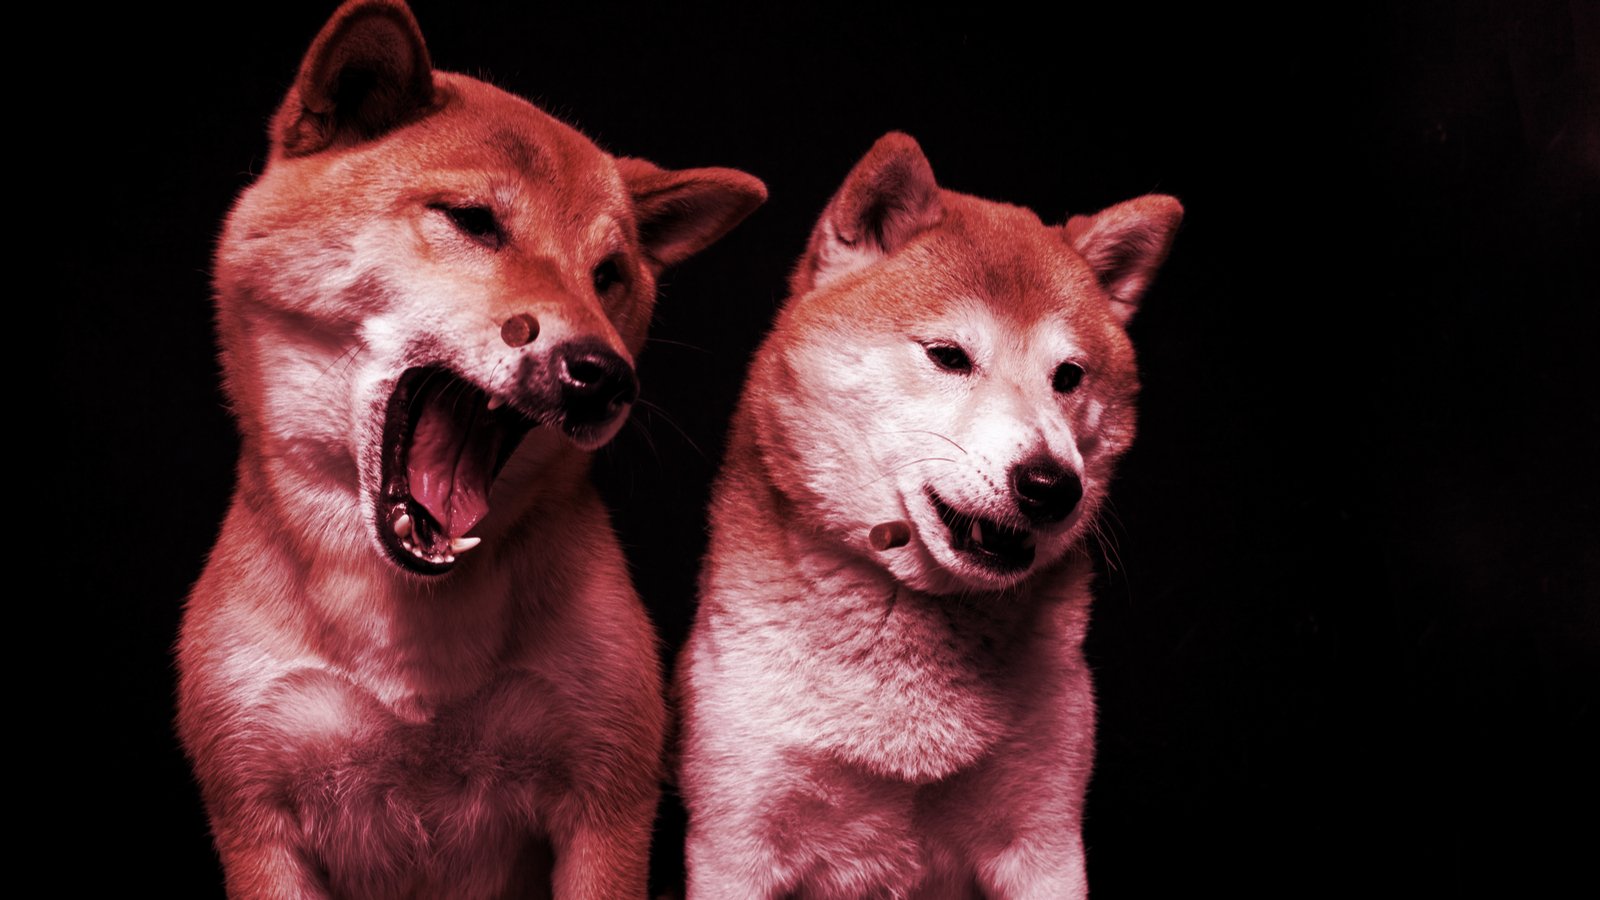 Dogecoin, Shiba Inu Tokens Suffer Week in Red as Investors Flee Meme Coins